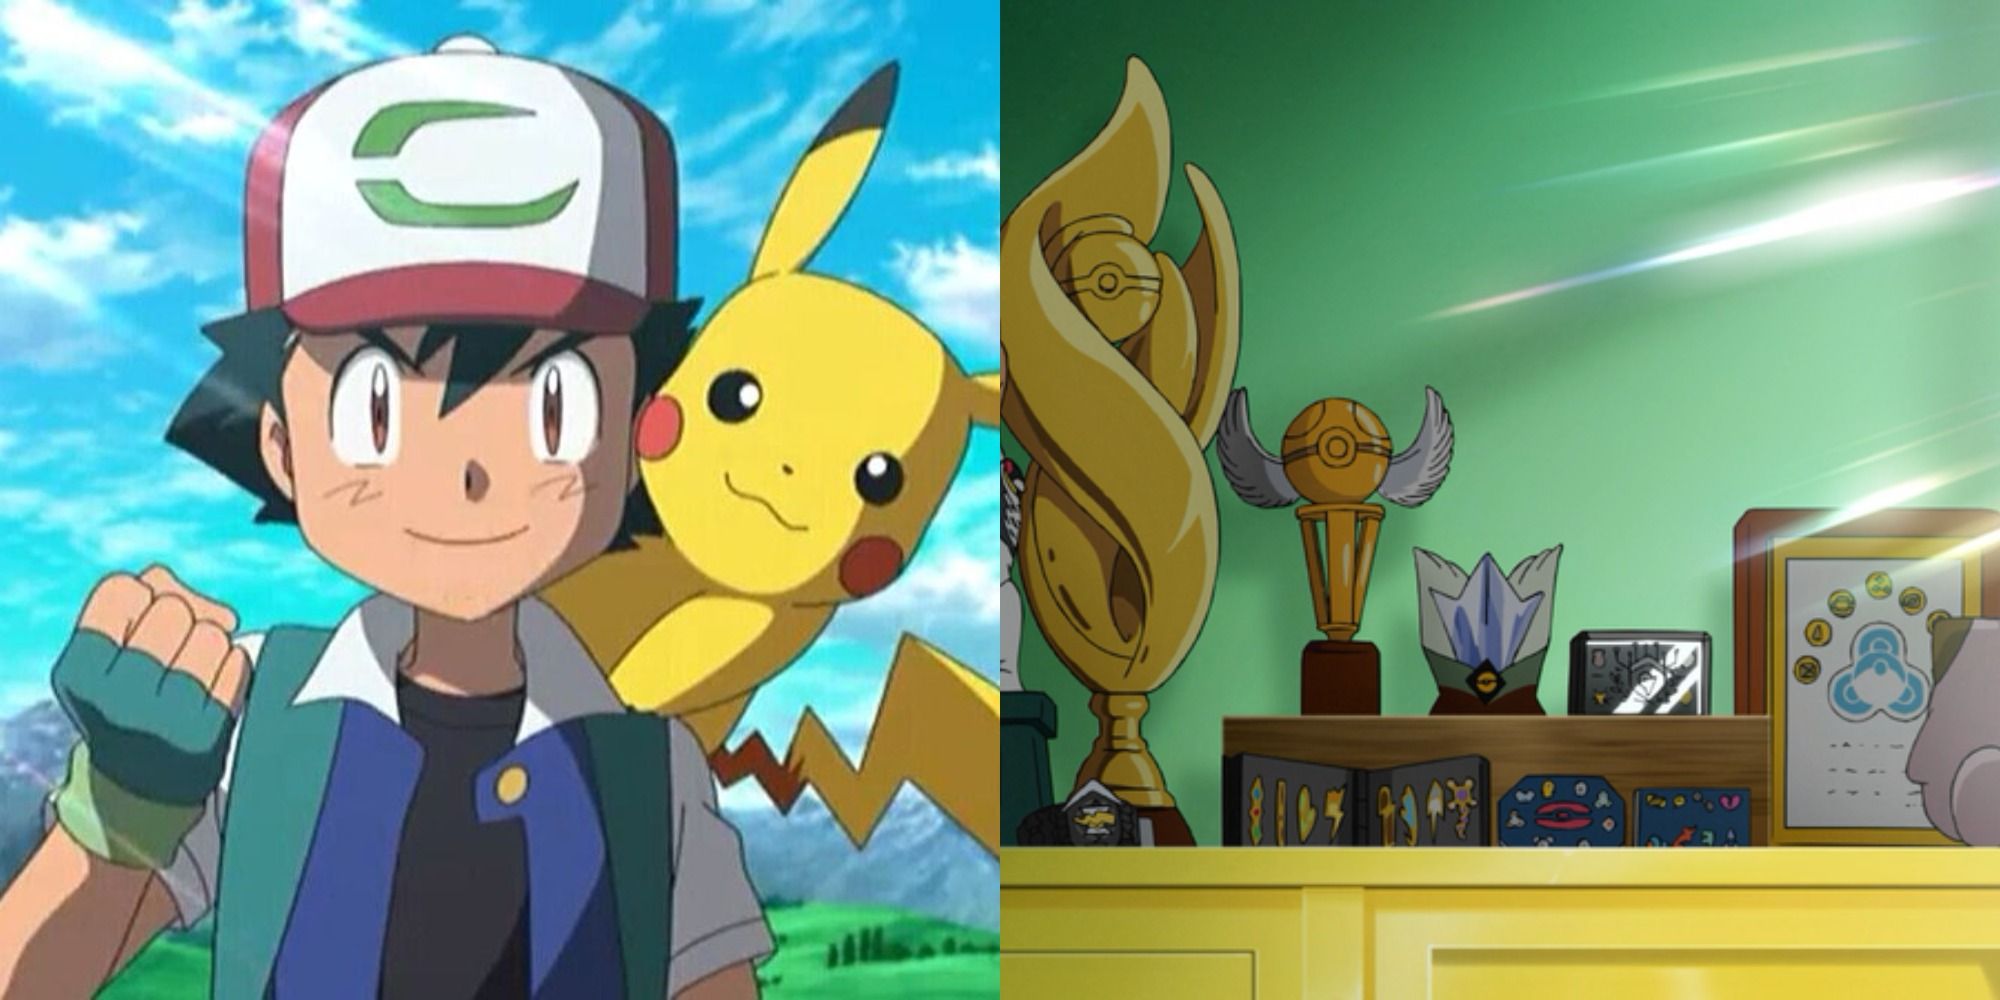 Pokémon: Every League Ash In (& Where Placed)